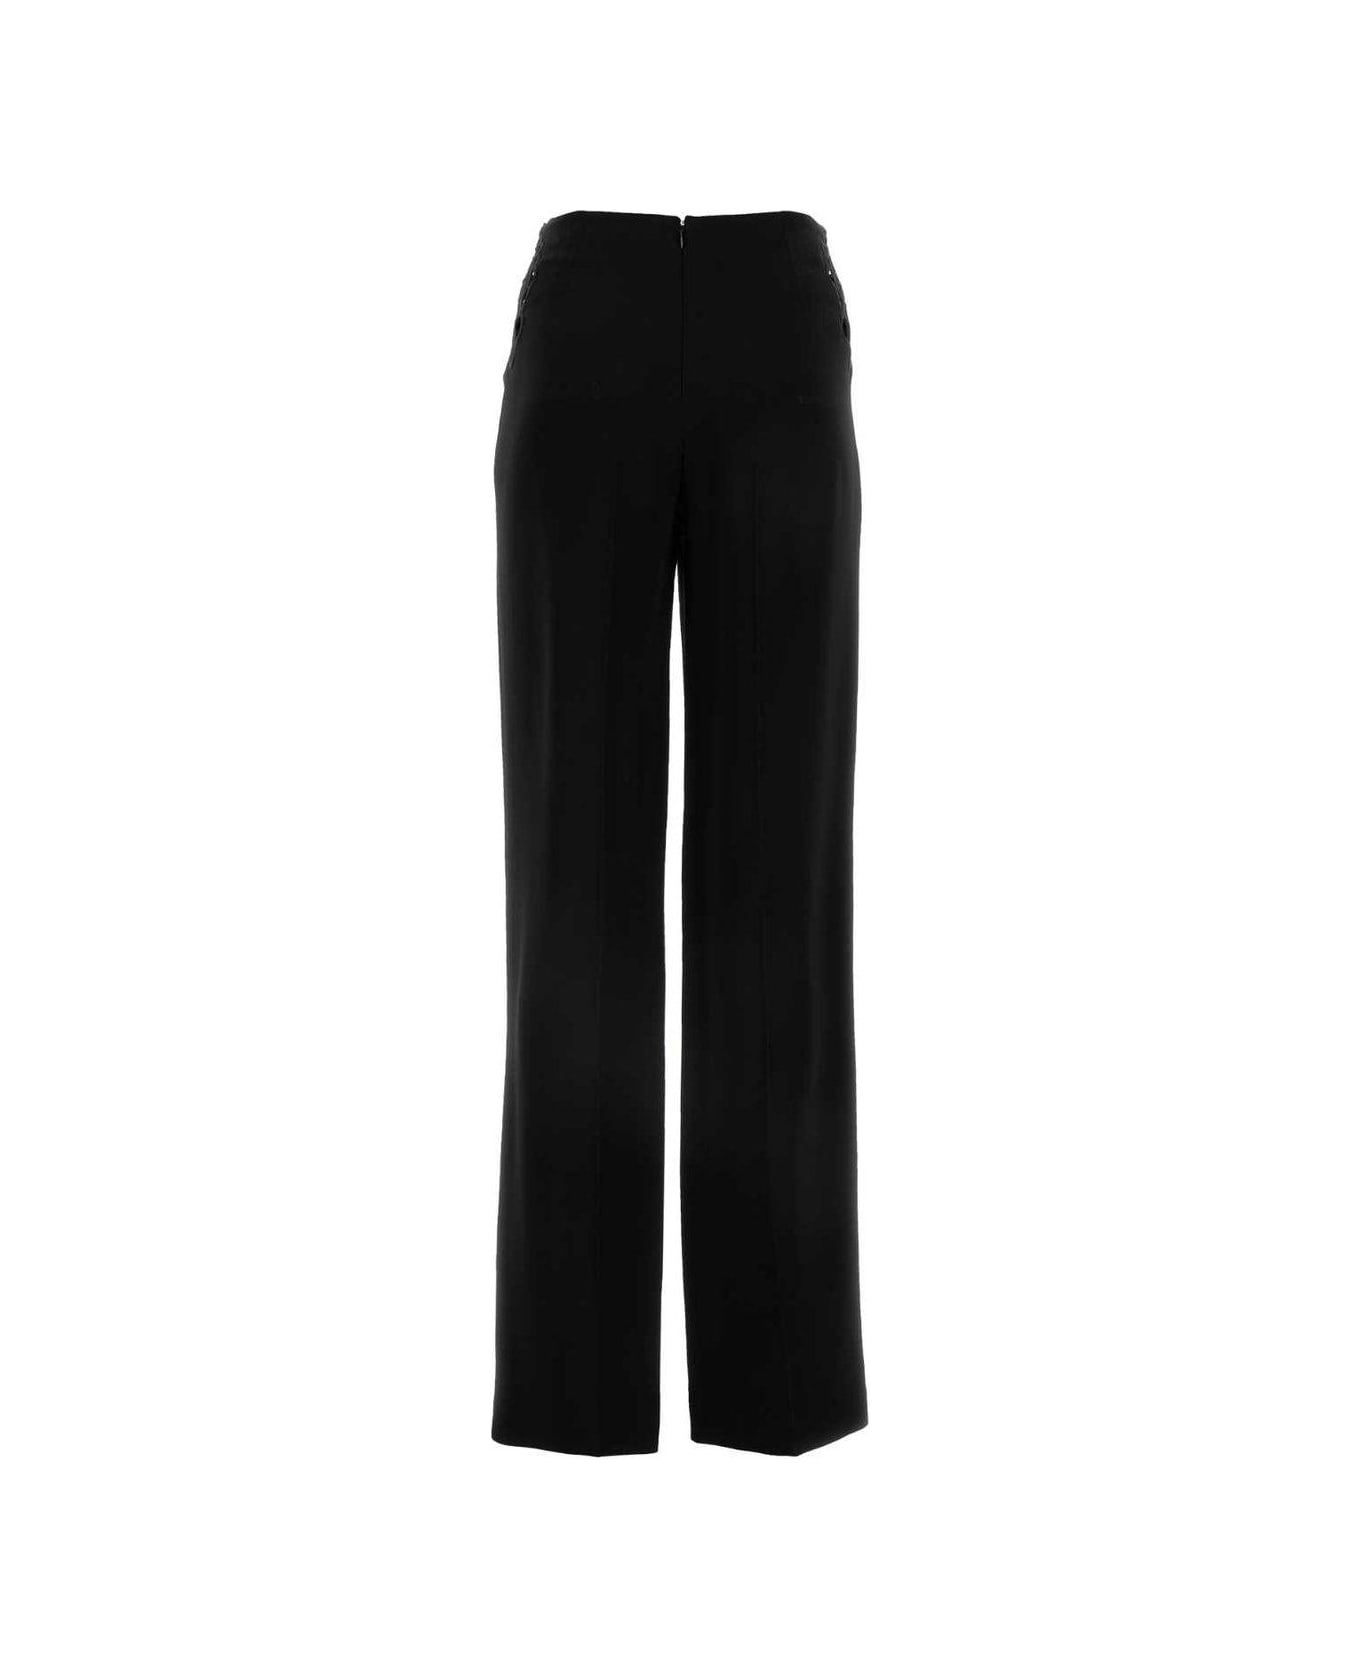 Stella McCartney Broderie-anglaise Tailored Trousers - Black ボトムス